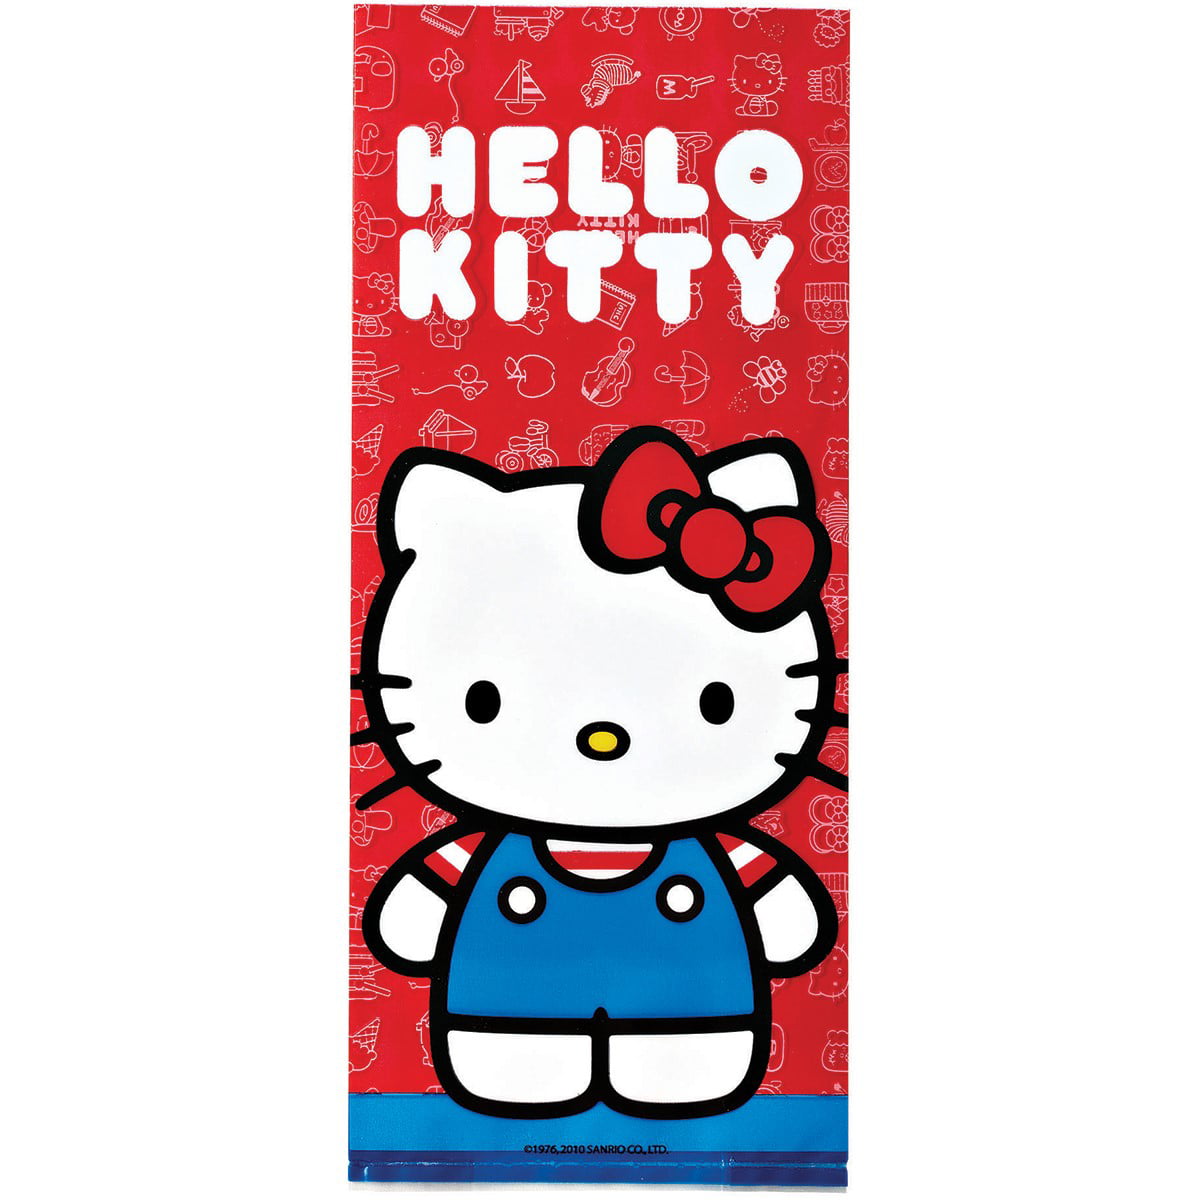 Hello Kitty Goodie and Favor Bags